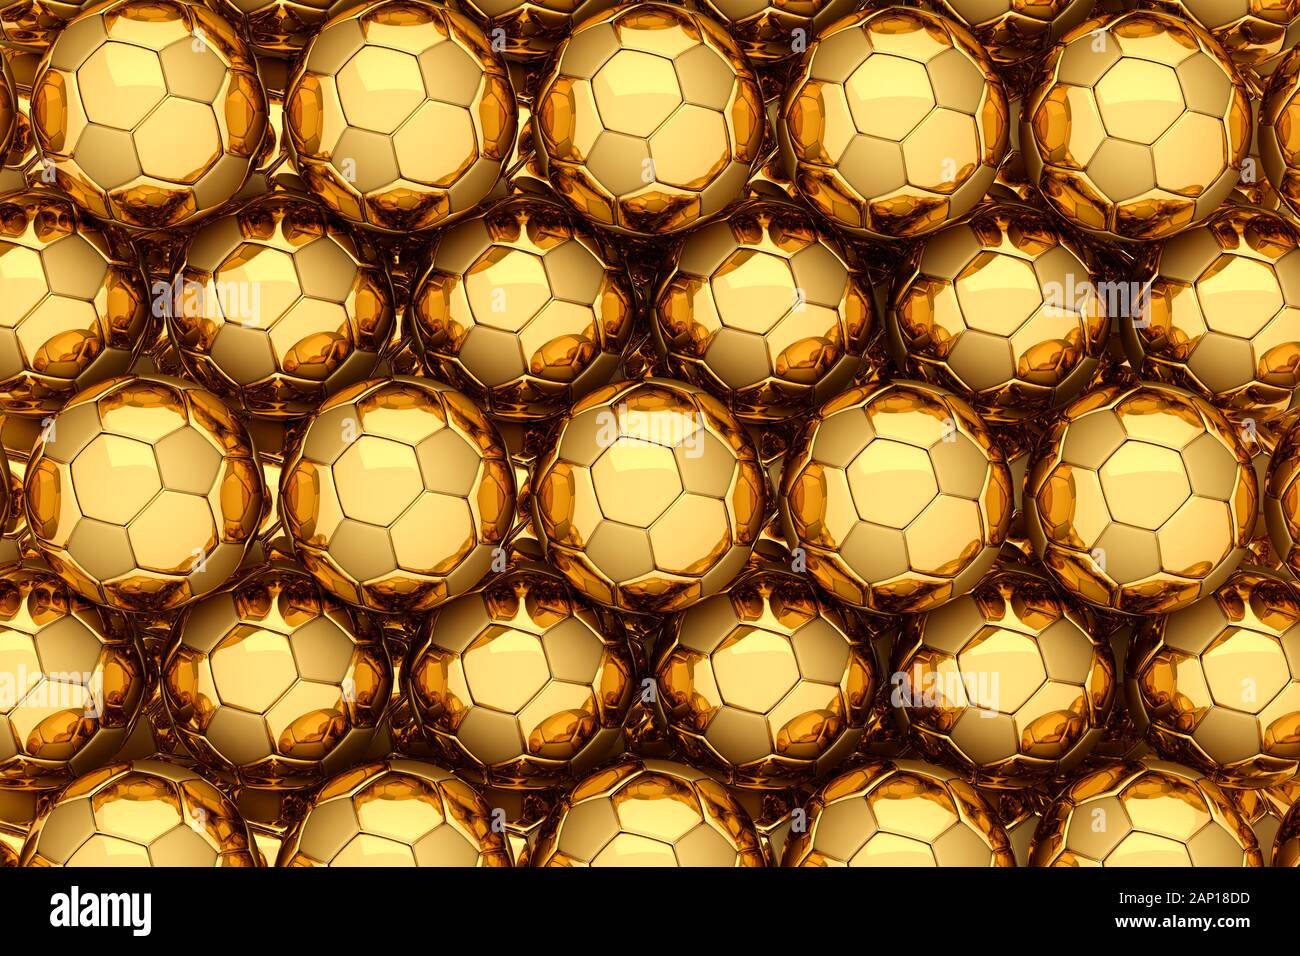 3D rendering: Full frame image of a heap of Golden Soccer balls. Big Business in sports, football, soccer. Stock Photo